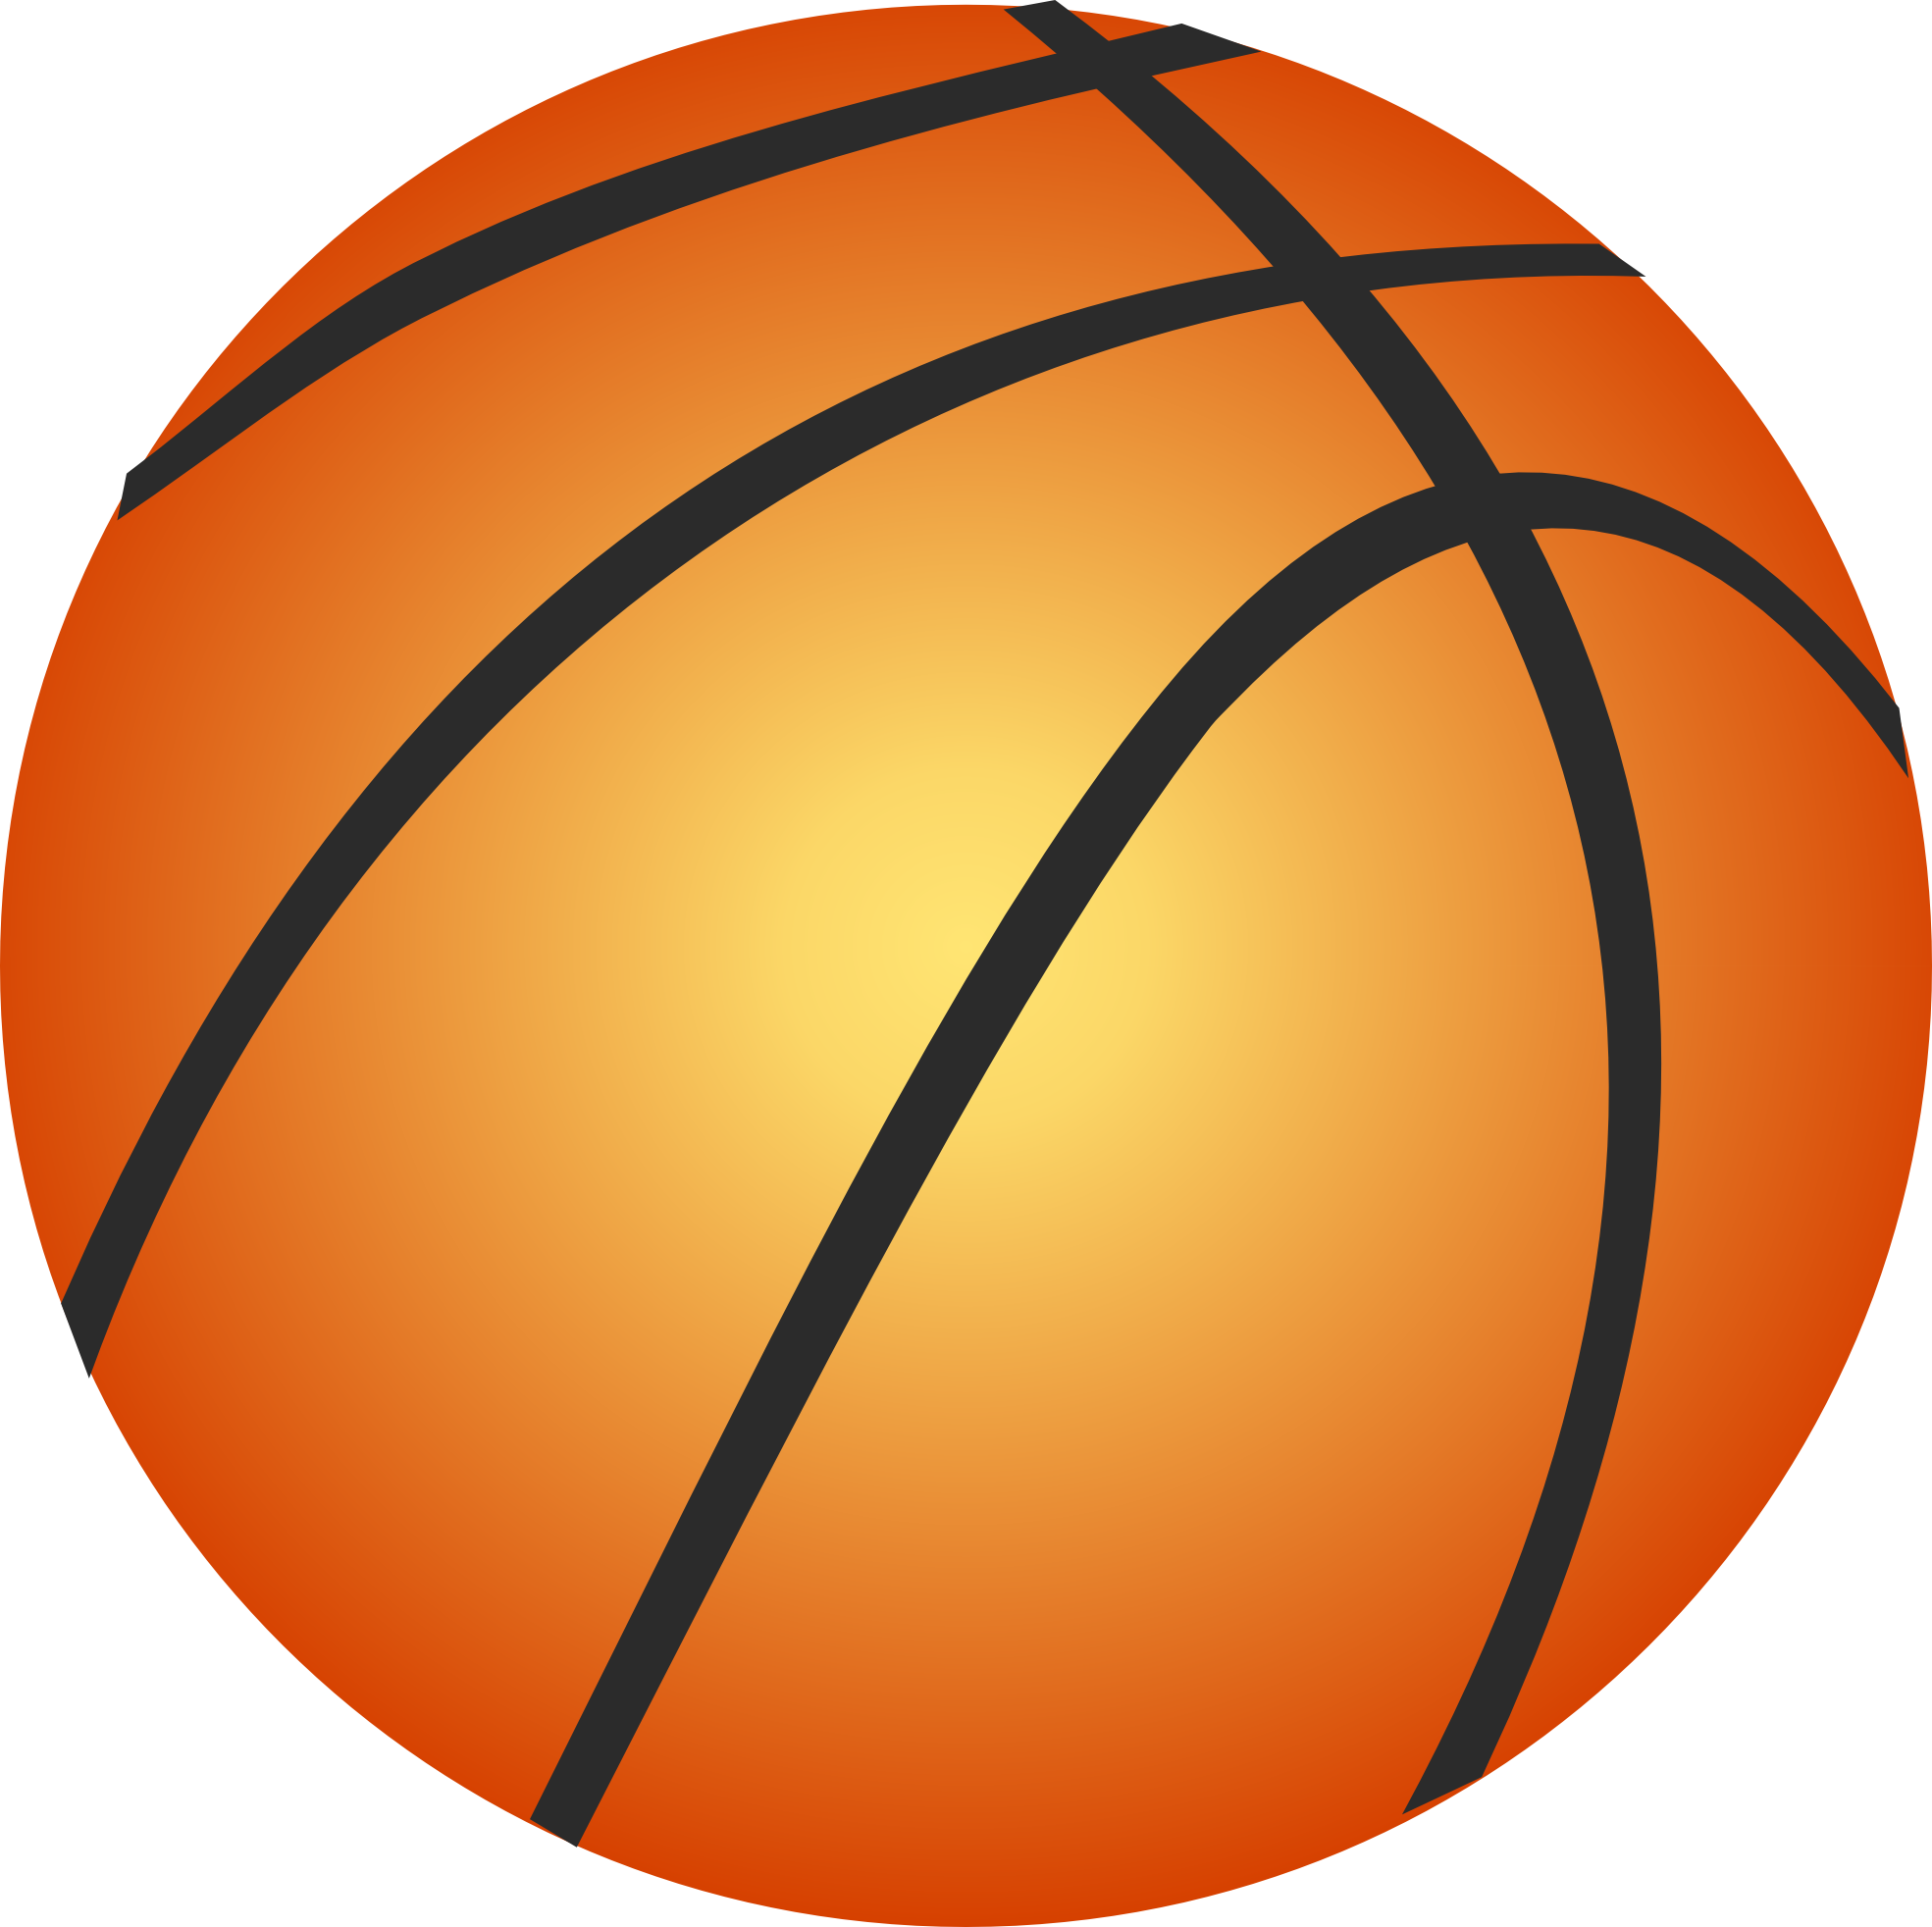 Basketball player clipart black and white free 5 – Gclipart.com